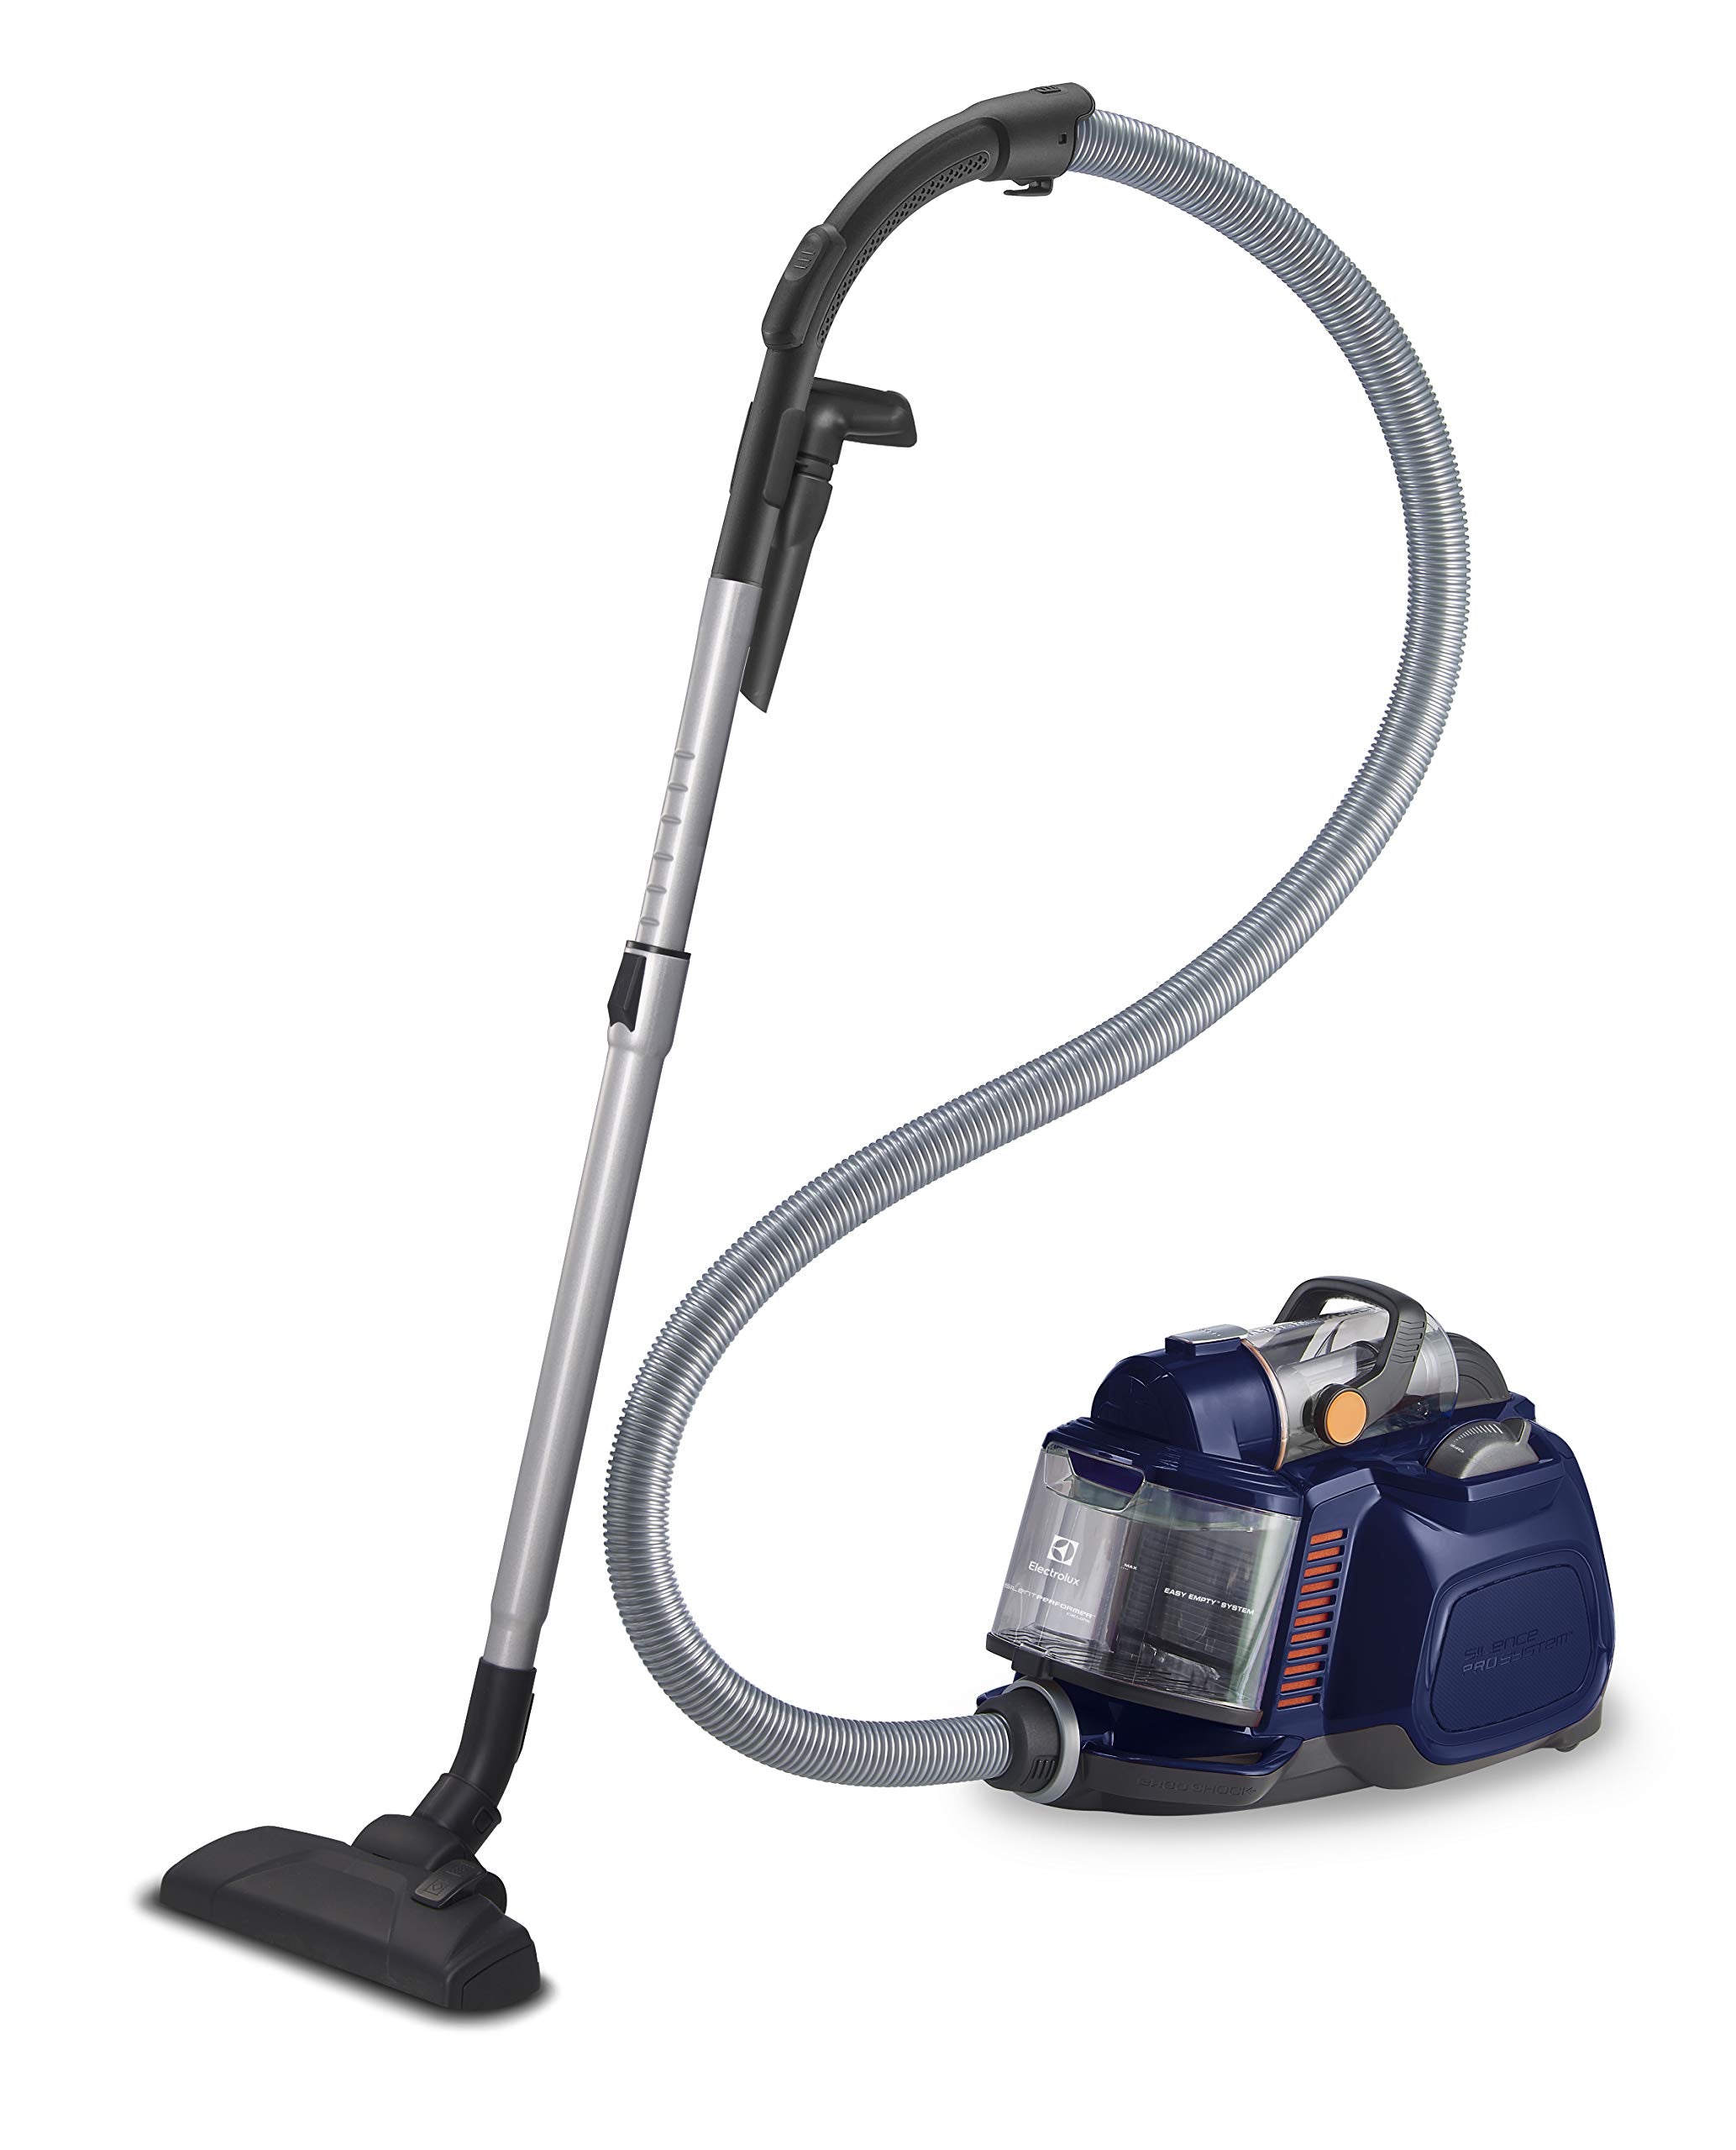 Electrolux 2200W Canister Bagless Vacuum Cleaner, Quiet Operation & Powerful Suction, Clean Air Filtration with Allergyplus Filter, Easy Empty, Best for Pet Hair, Carpet, Tile, Hard Floor, ZSPC2000(مجربة)